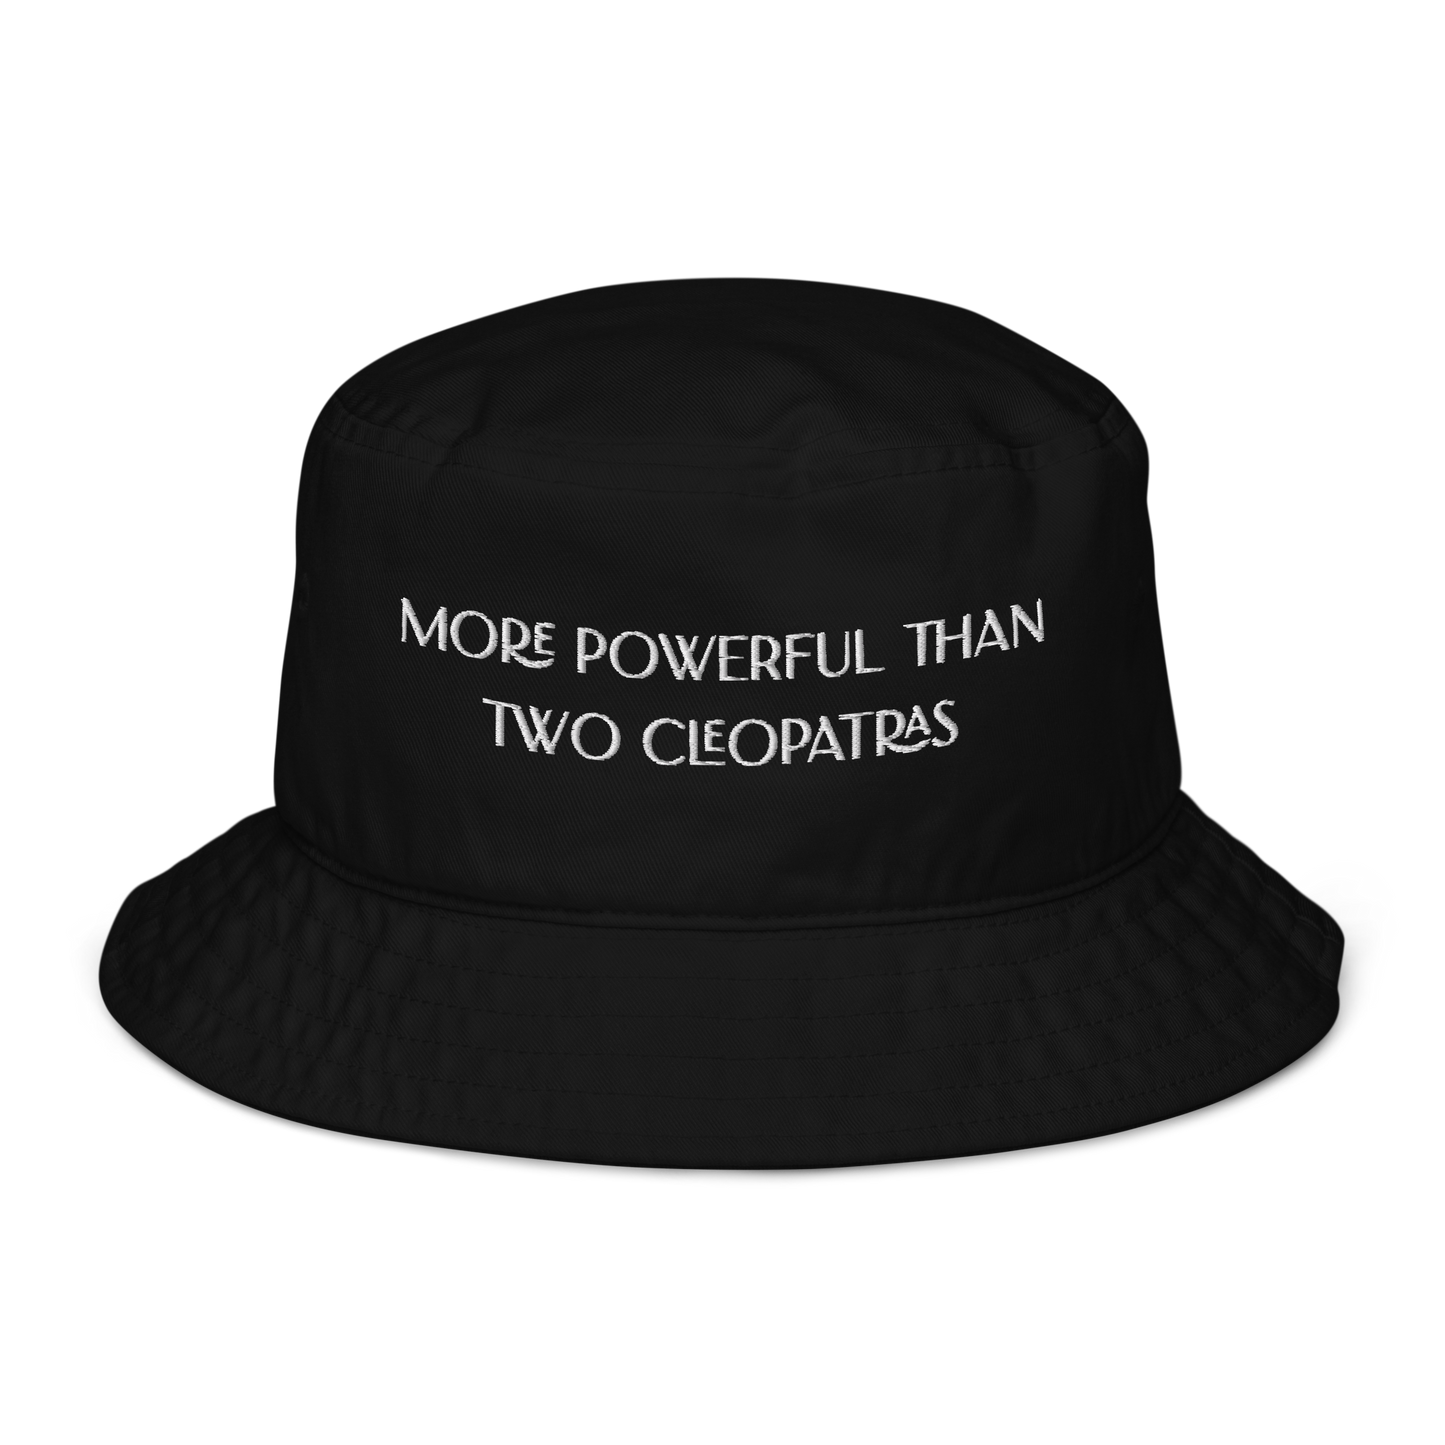 More Powerful Than Two Cleopatras Organic Bucket Hat